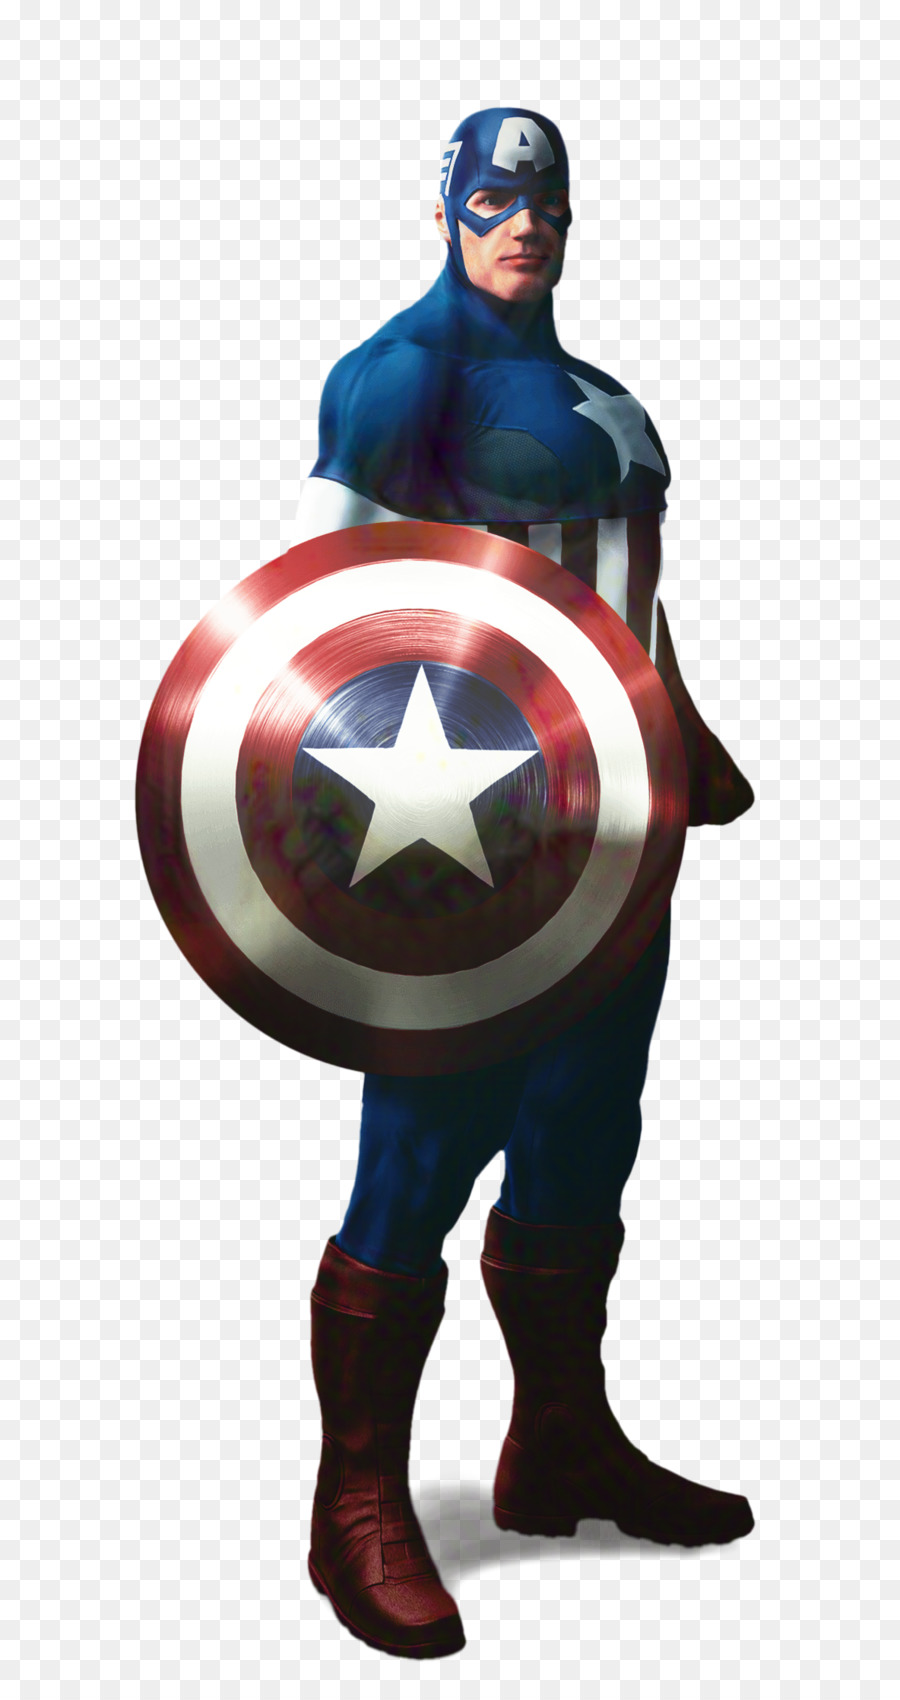 Captain America: The First Avenger -  png download - 1184*2213 - Free Transparent Captain America png Download.